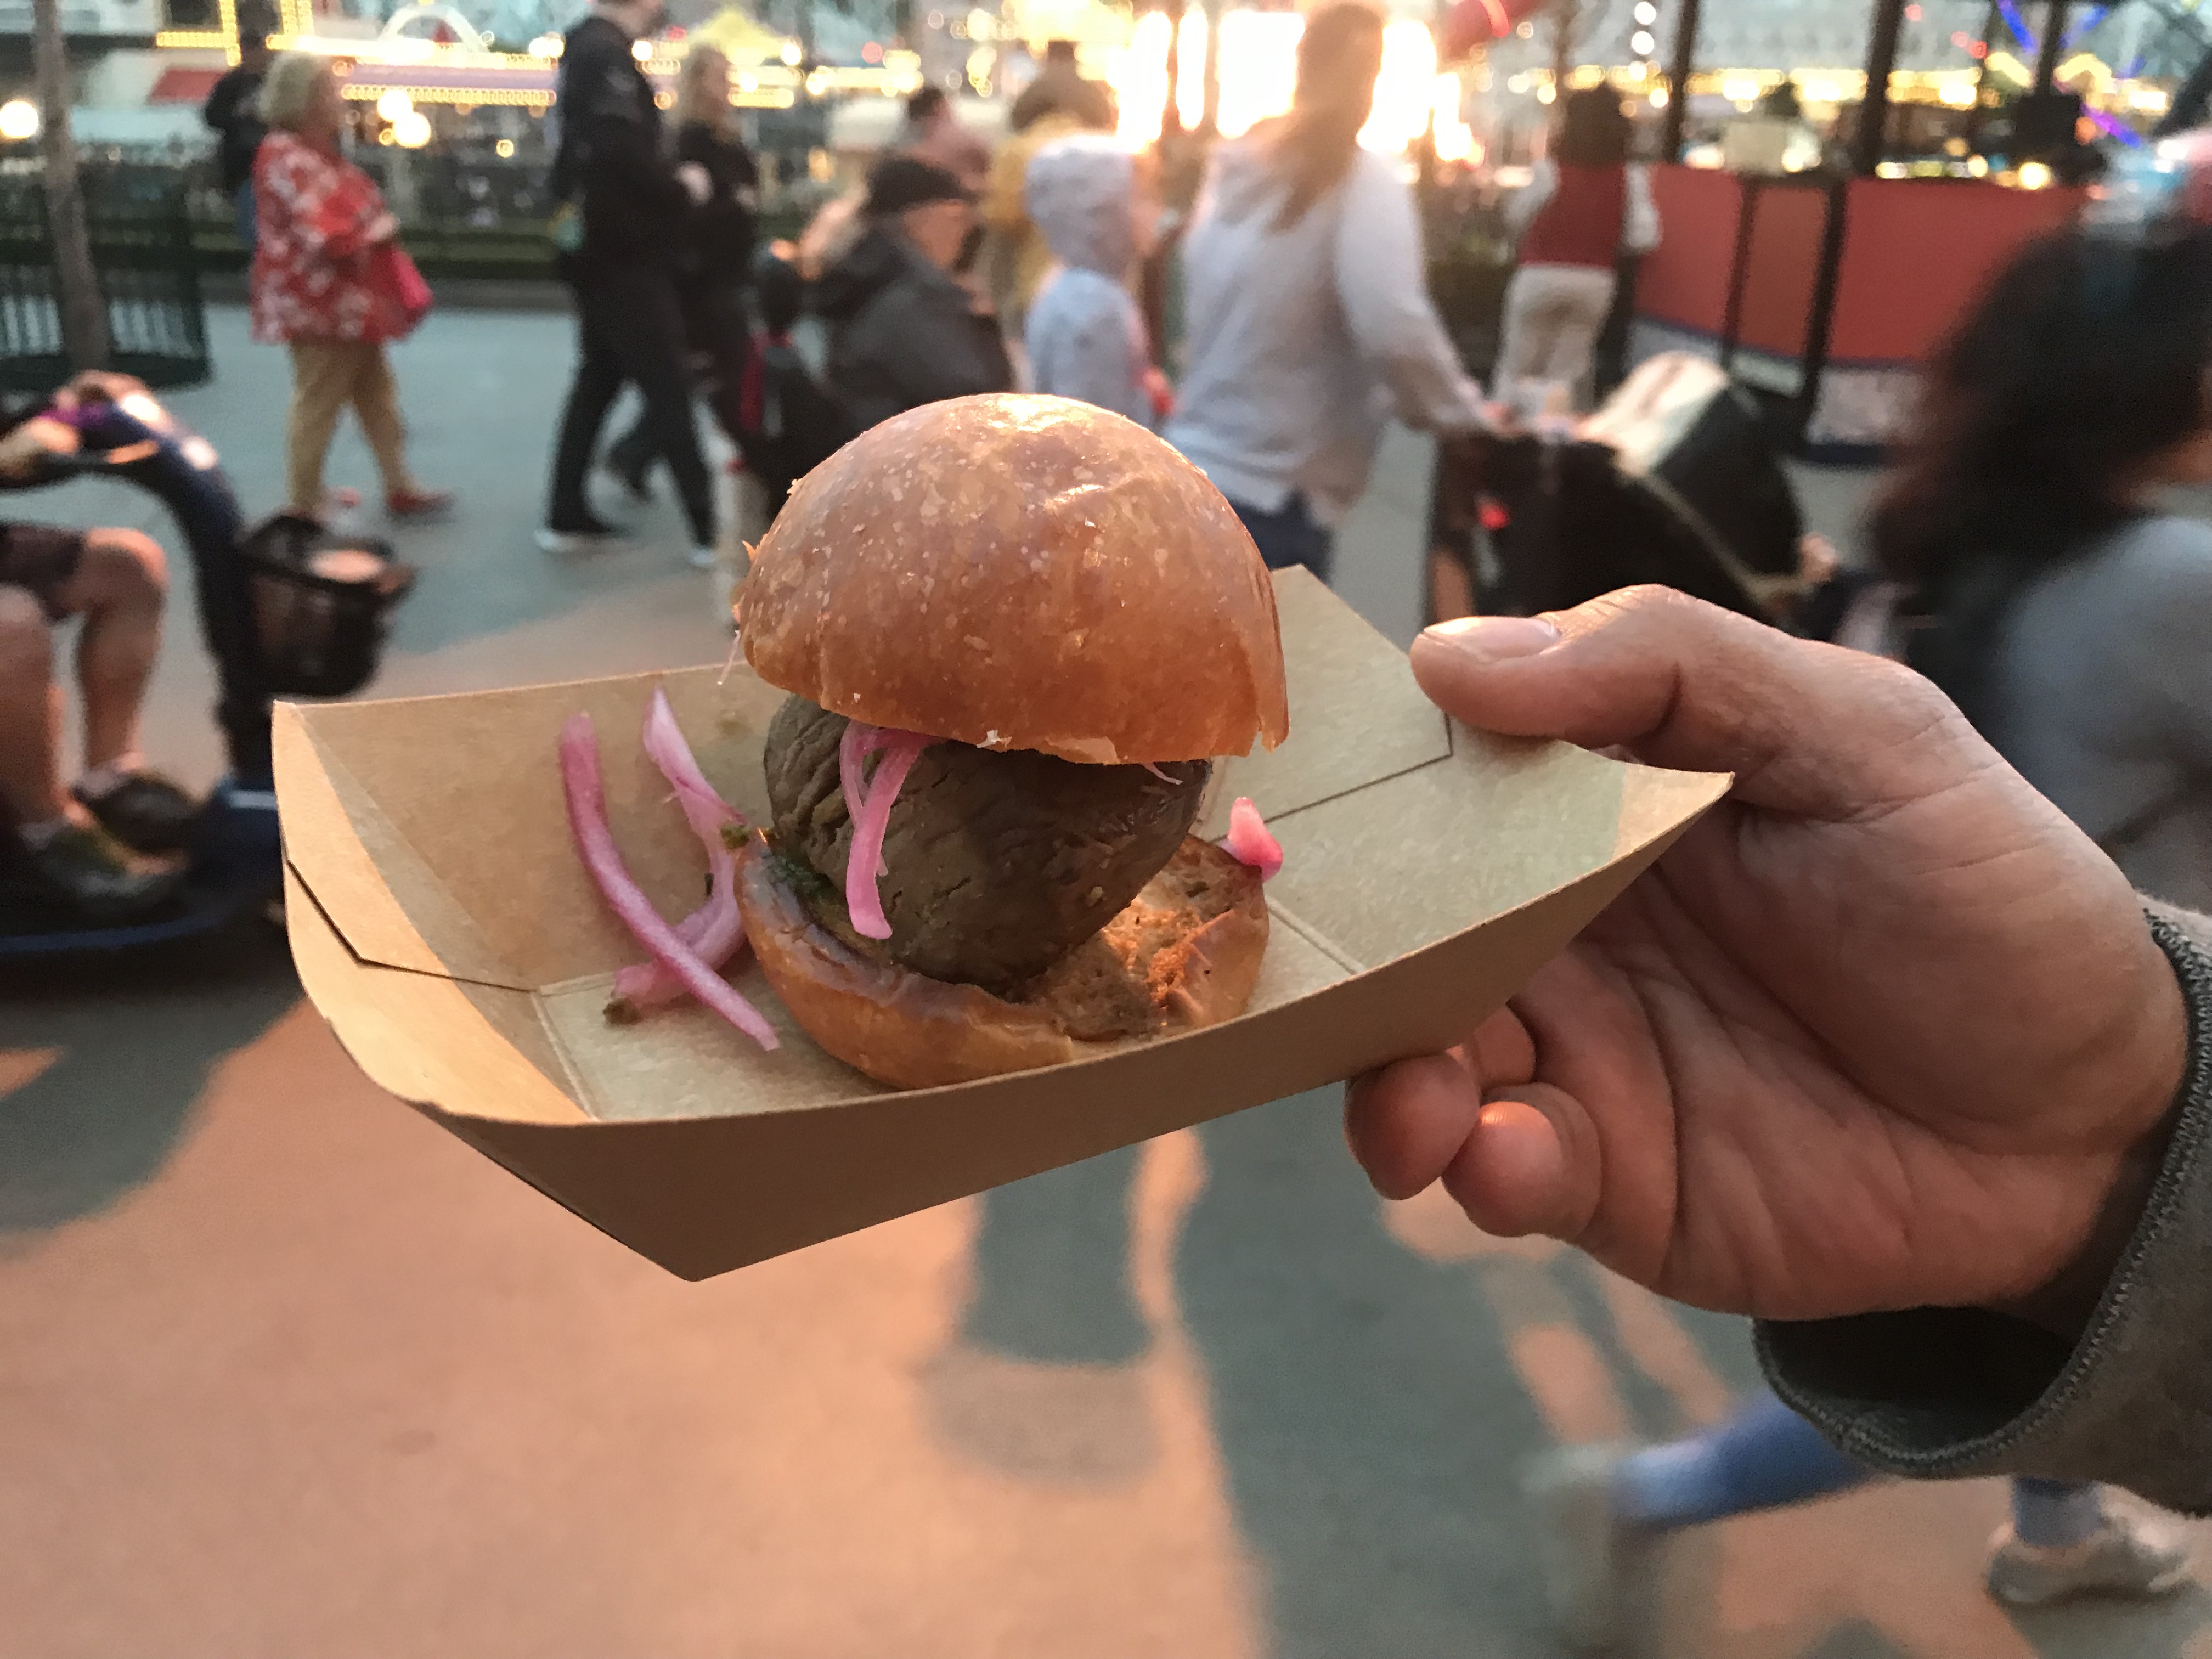 Disney’s California Adventure Sip and Savor Pass for the Food and Wine Festival